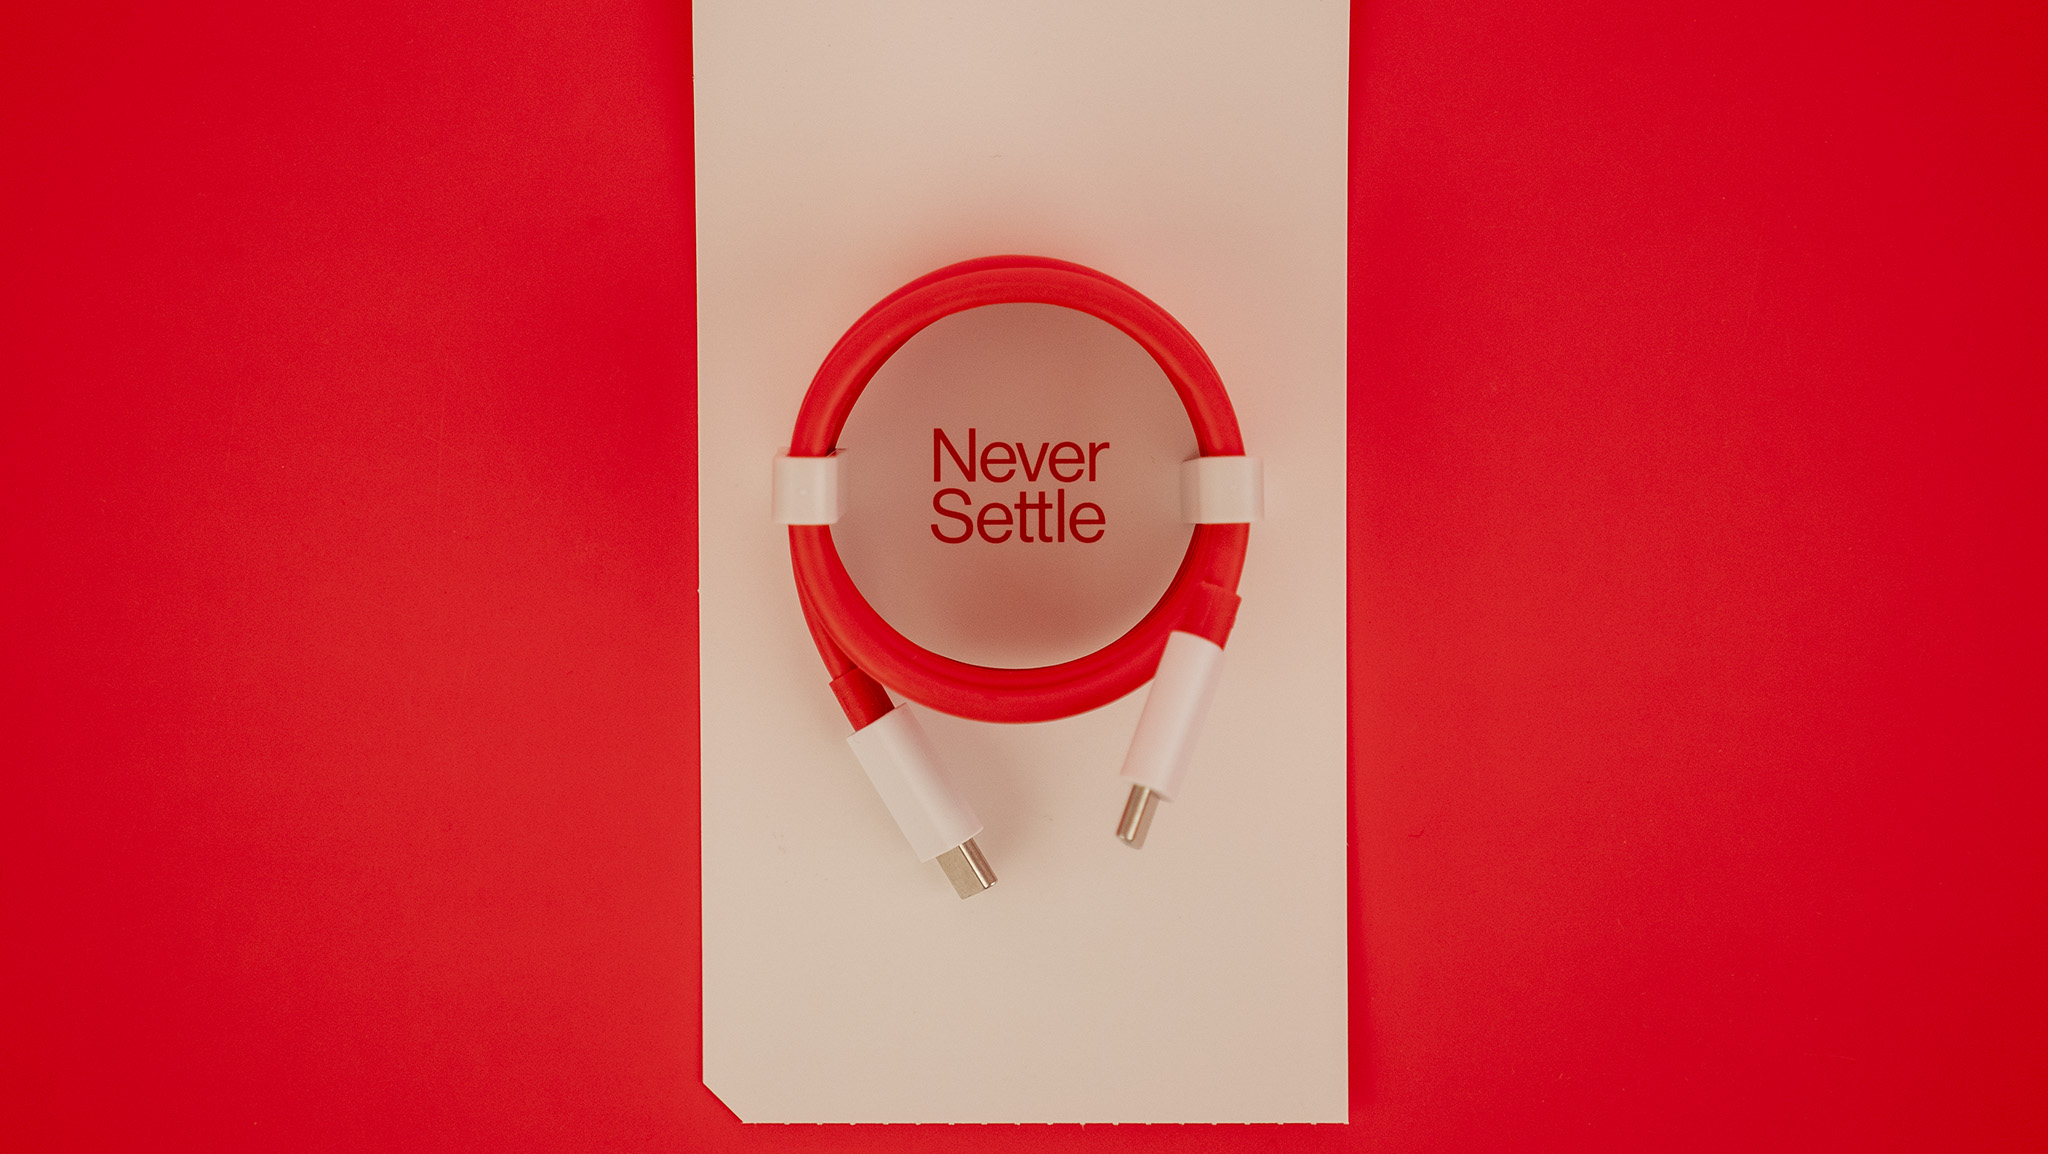 OnePlus charging cable